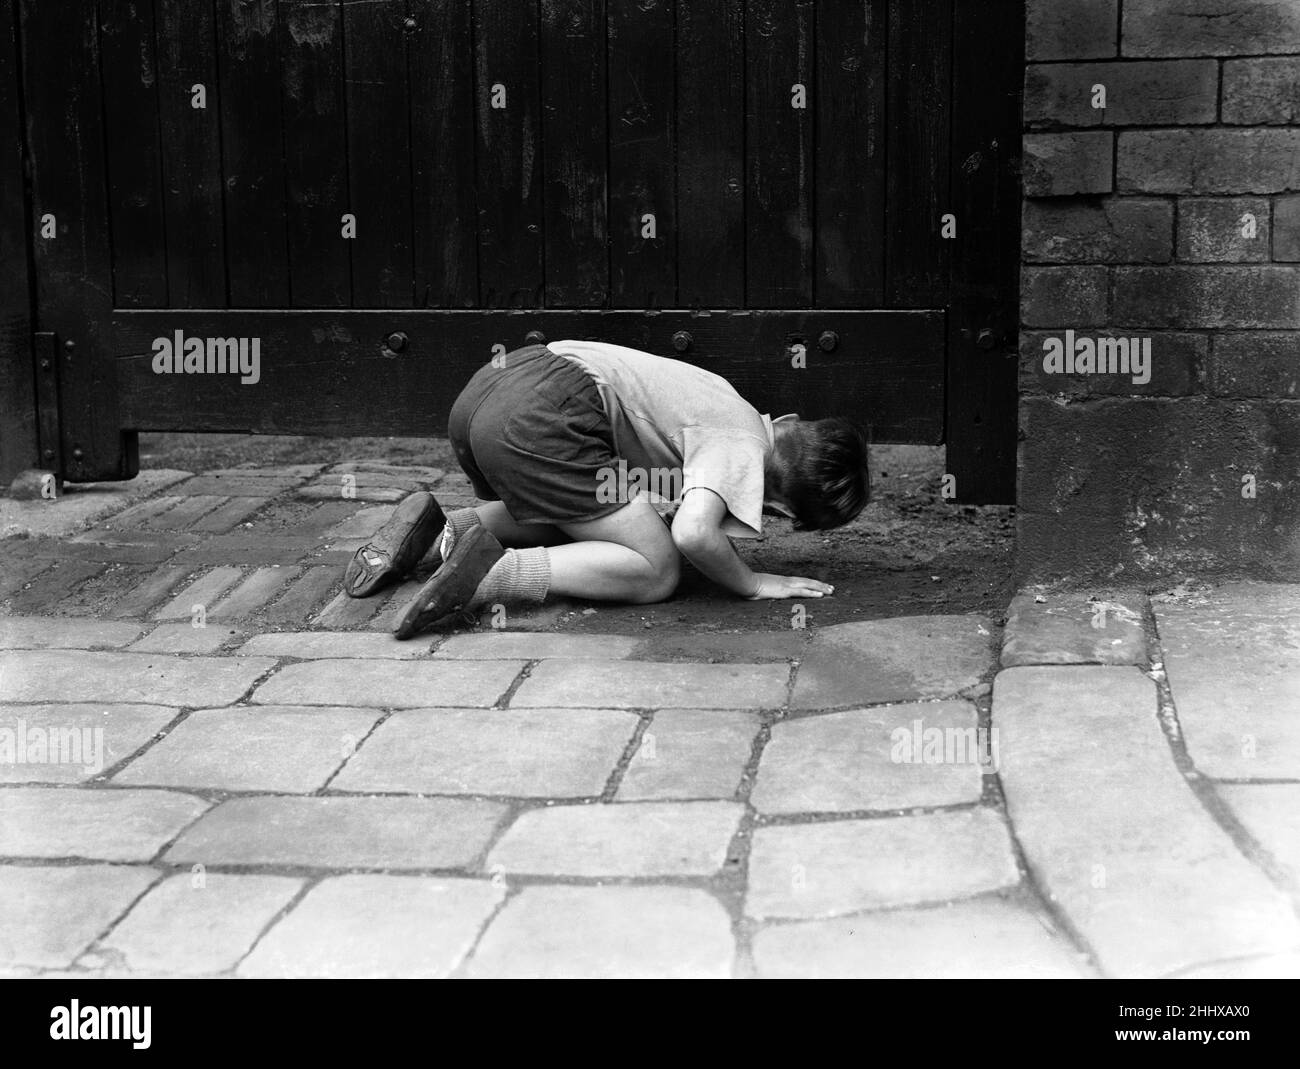 England V Australia 1954 4th Test Match Headingley Leeds. A small boy outside the Yorkshire Cricket Club in Headingley takes a quick peek under the great wooden doors to see how England are fairing in the fourth test against Australia. 23rd July 1954 Stock Photo